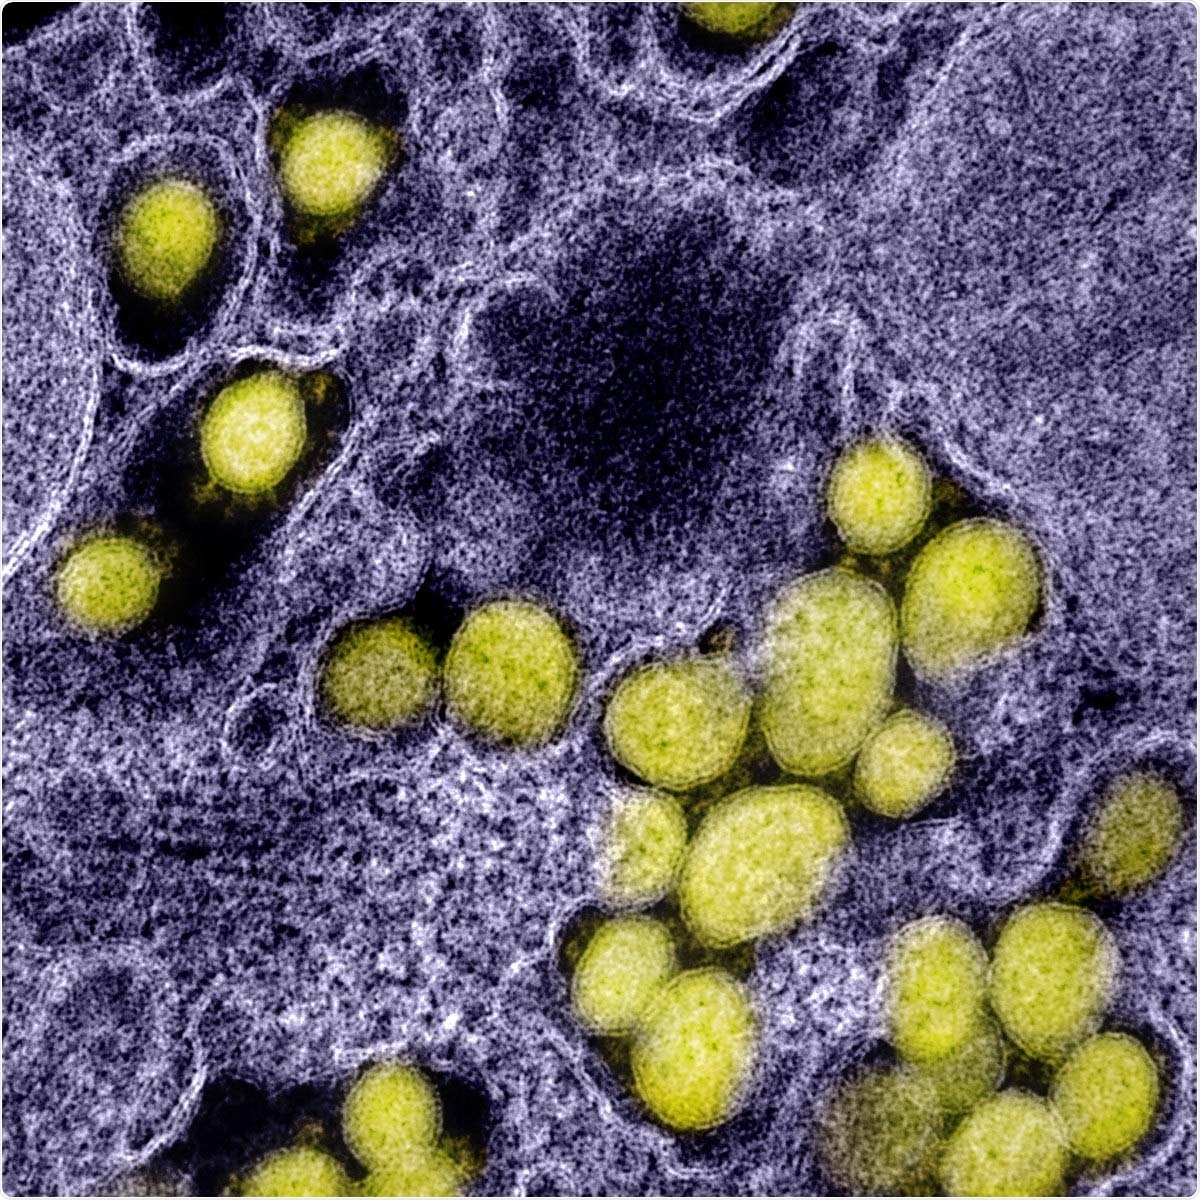 Study: Rapid feedback on hospital onset SARS-CoV-2 infections combining epidemiological and sequencing data. Transmission electron micrograph of SARS-CoV-2 virus particles, isolated from a patient. Image captured and color-enhanced at the NIAID Integrated Research Facility (IRF) in Fort Detrick, Maryland. Image Credit: NIAID / Flickr